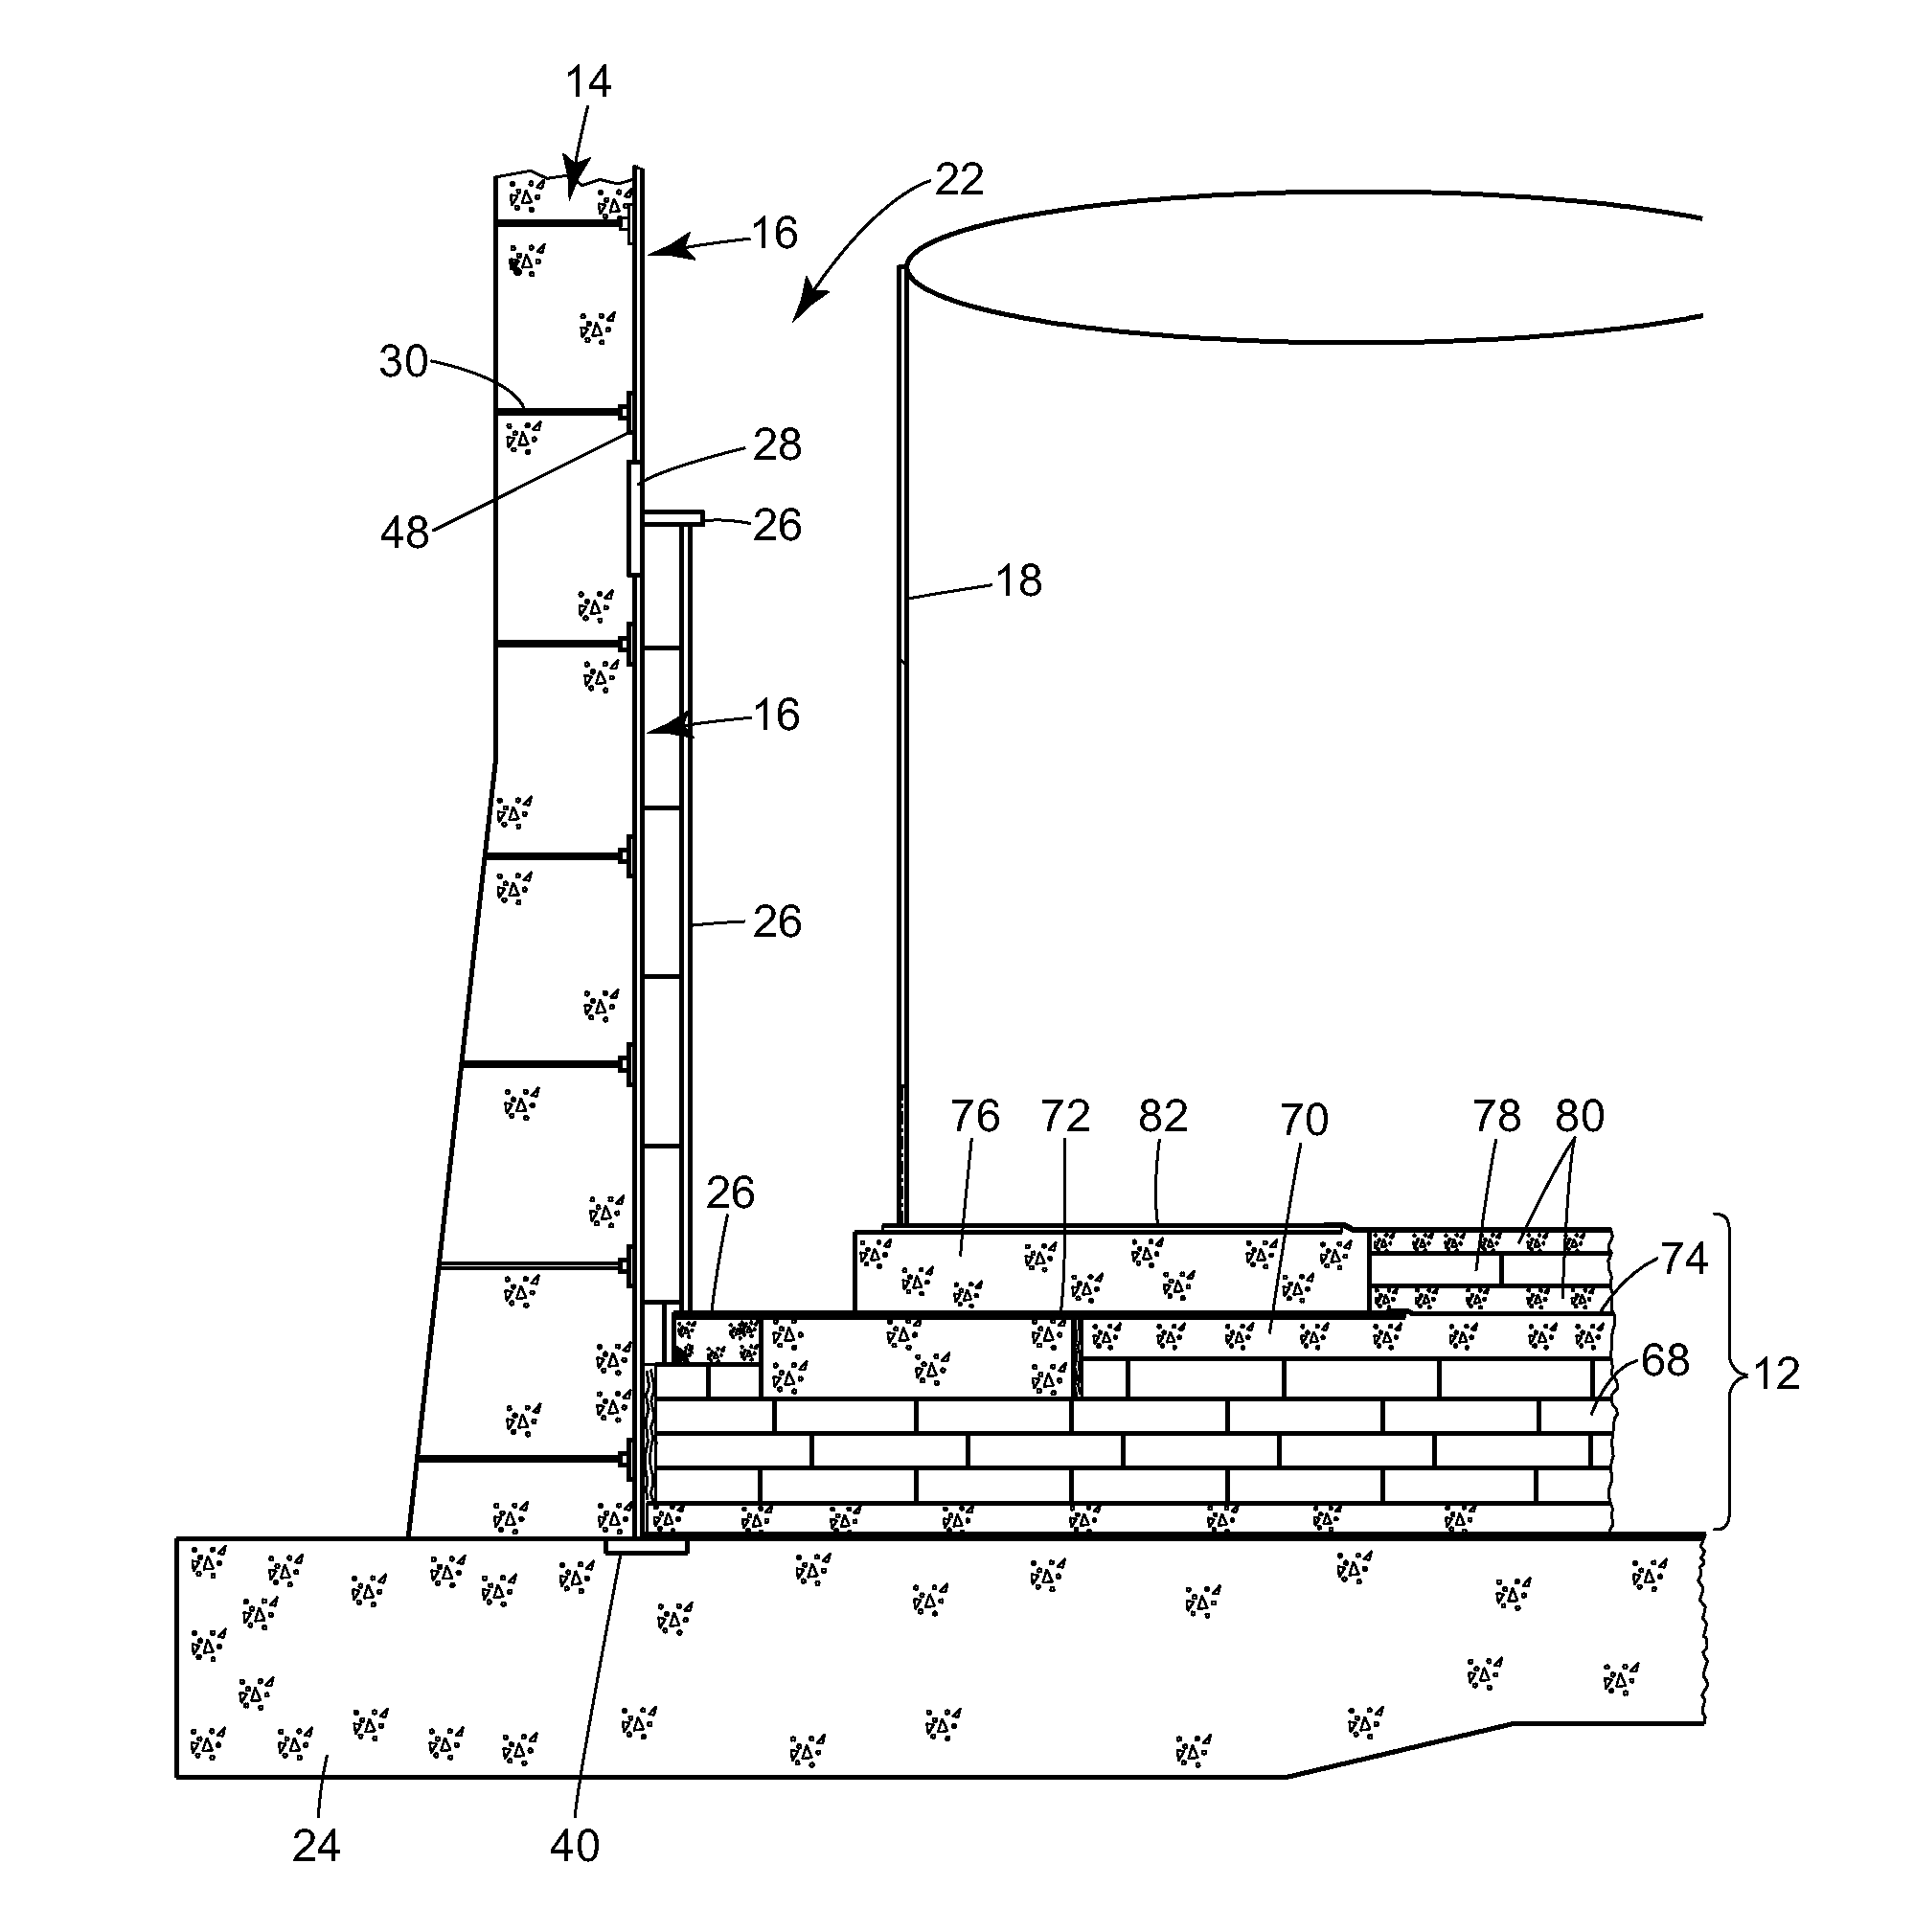 Method of constructing a storage tank for cryogenic liquids